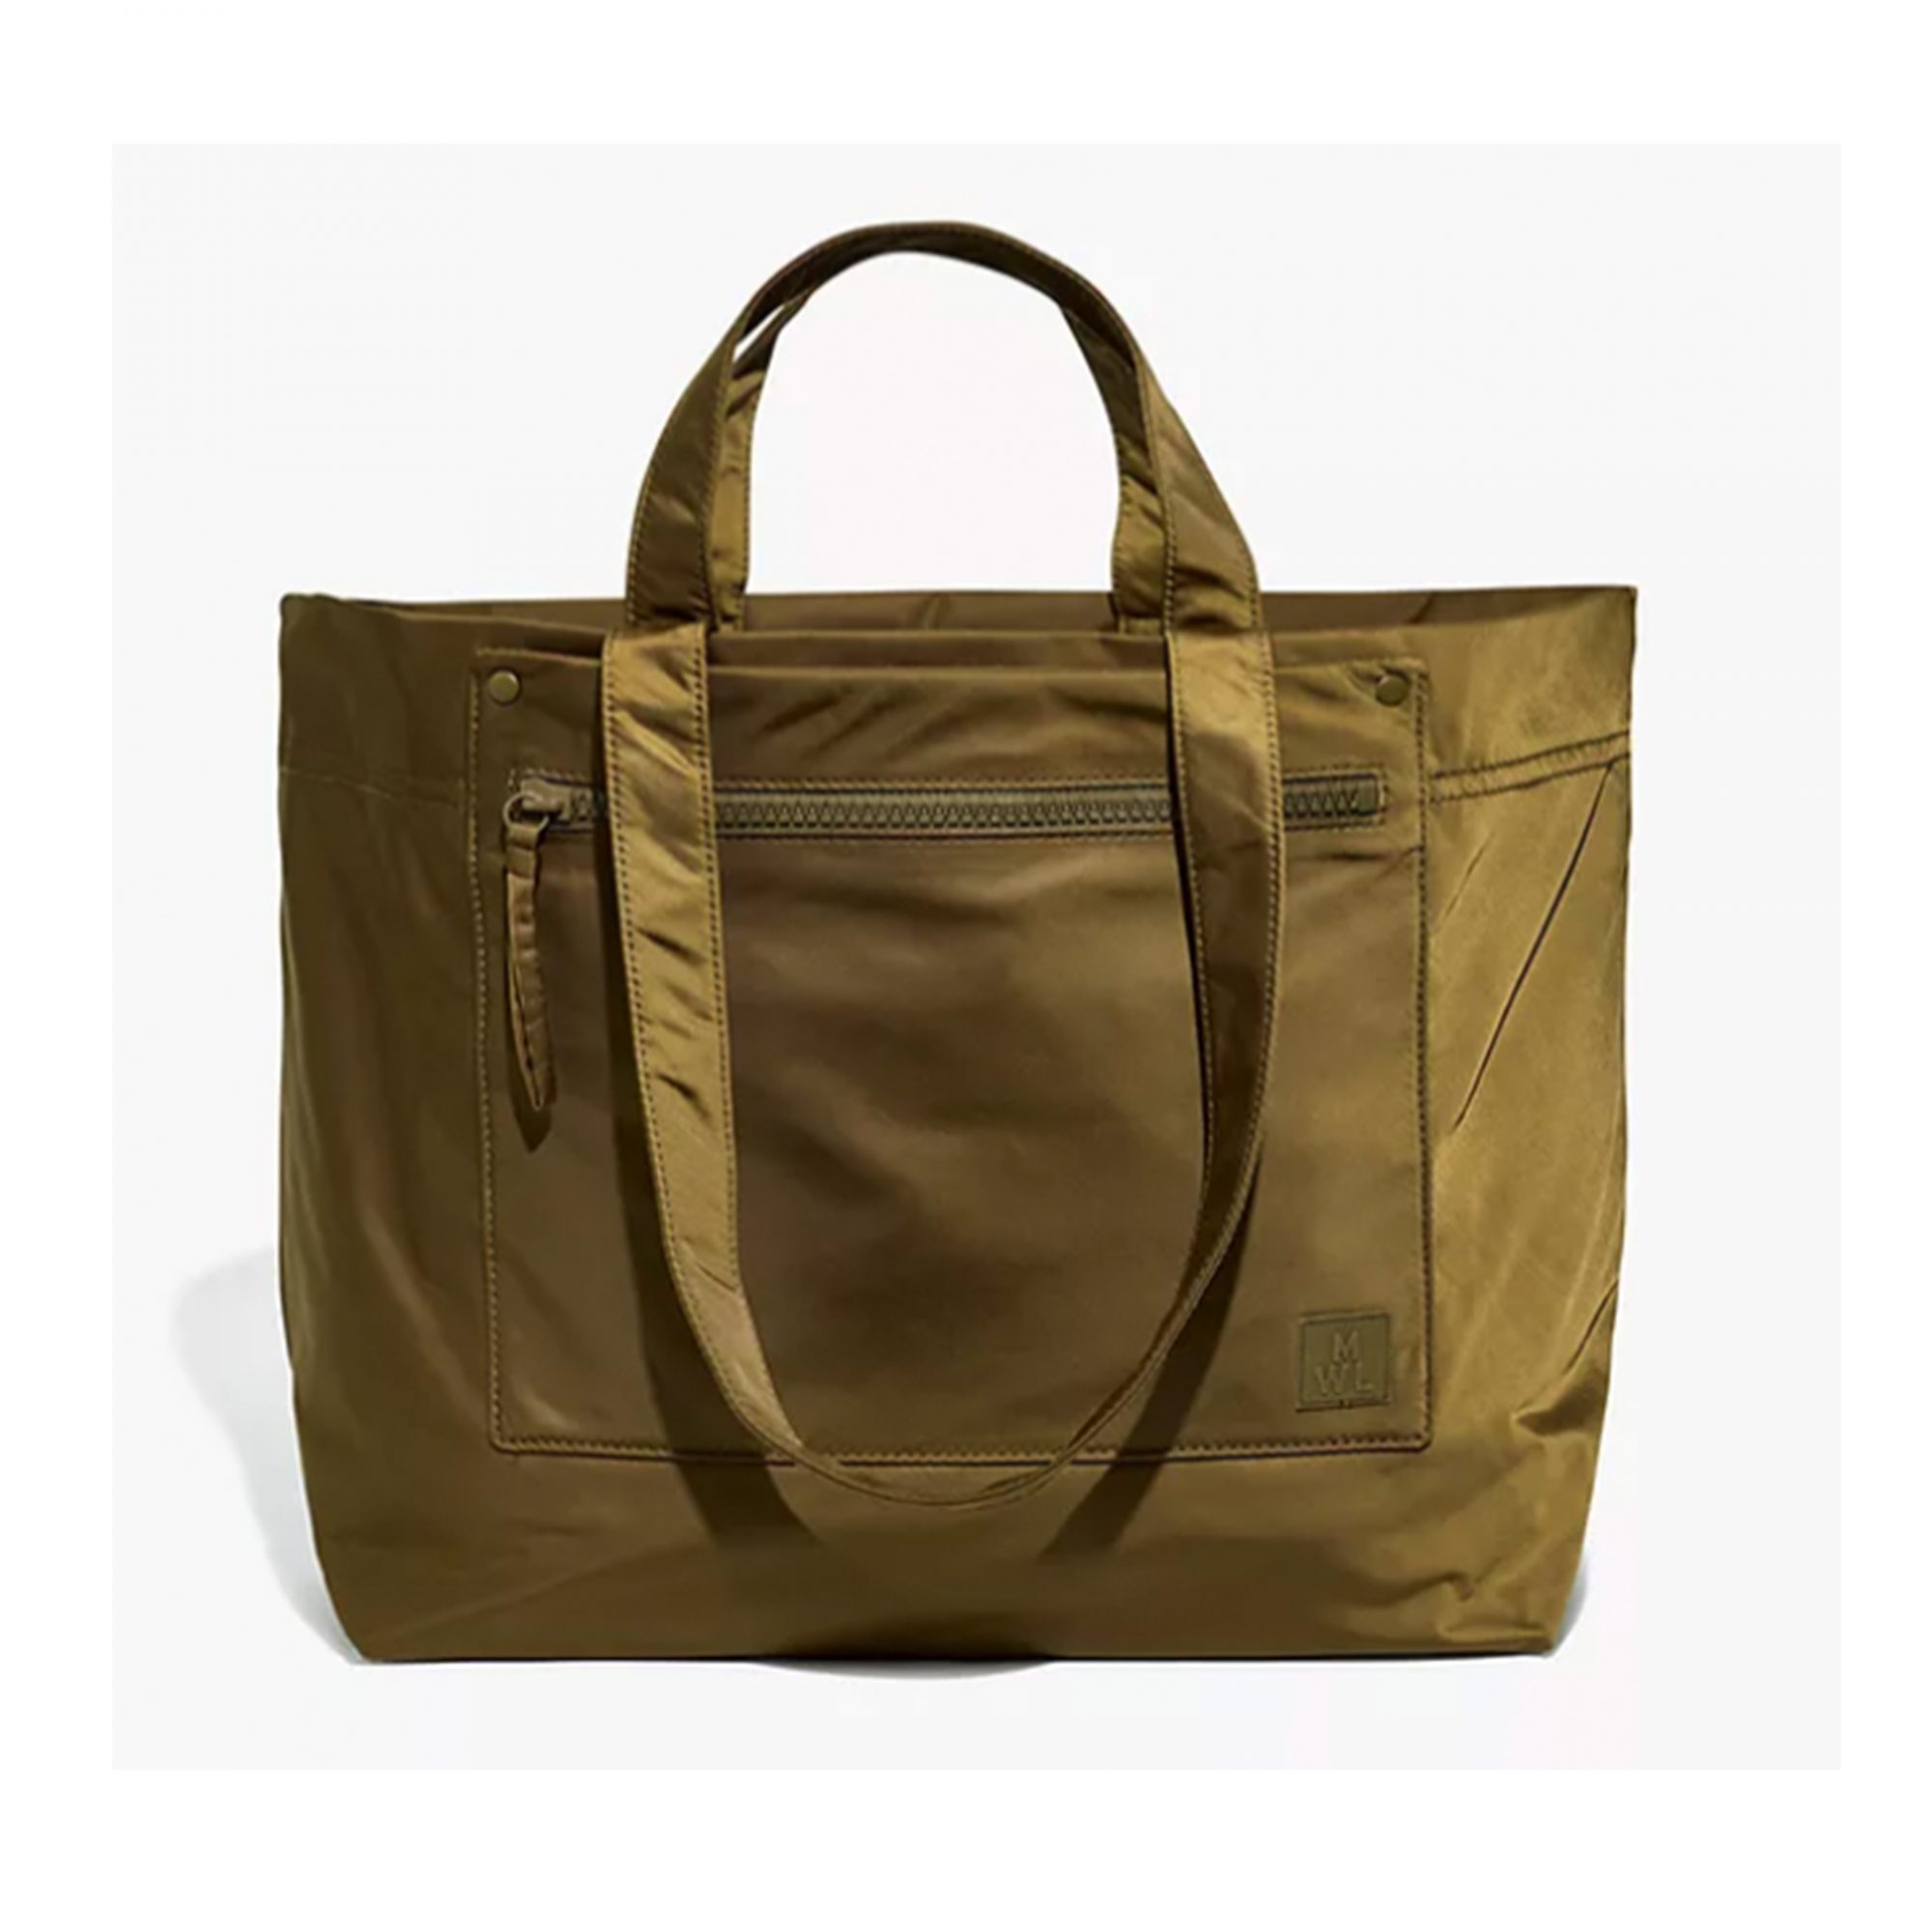 madewell-tote-bag, best-travel-bags